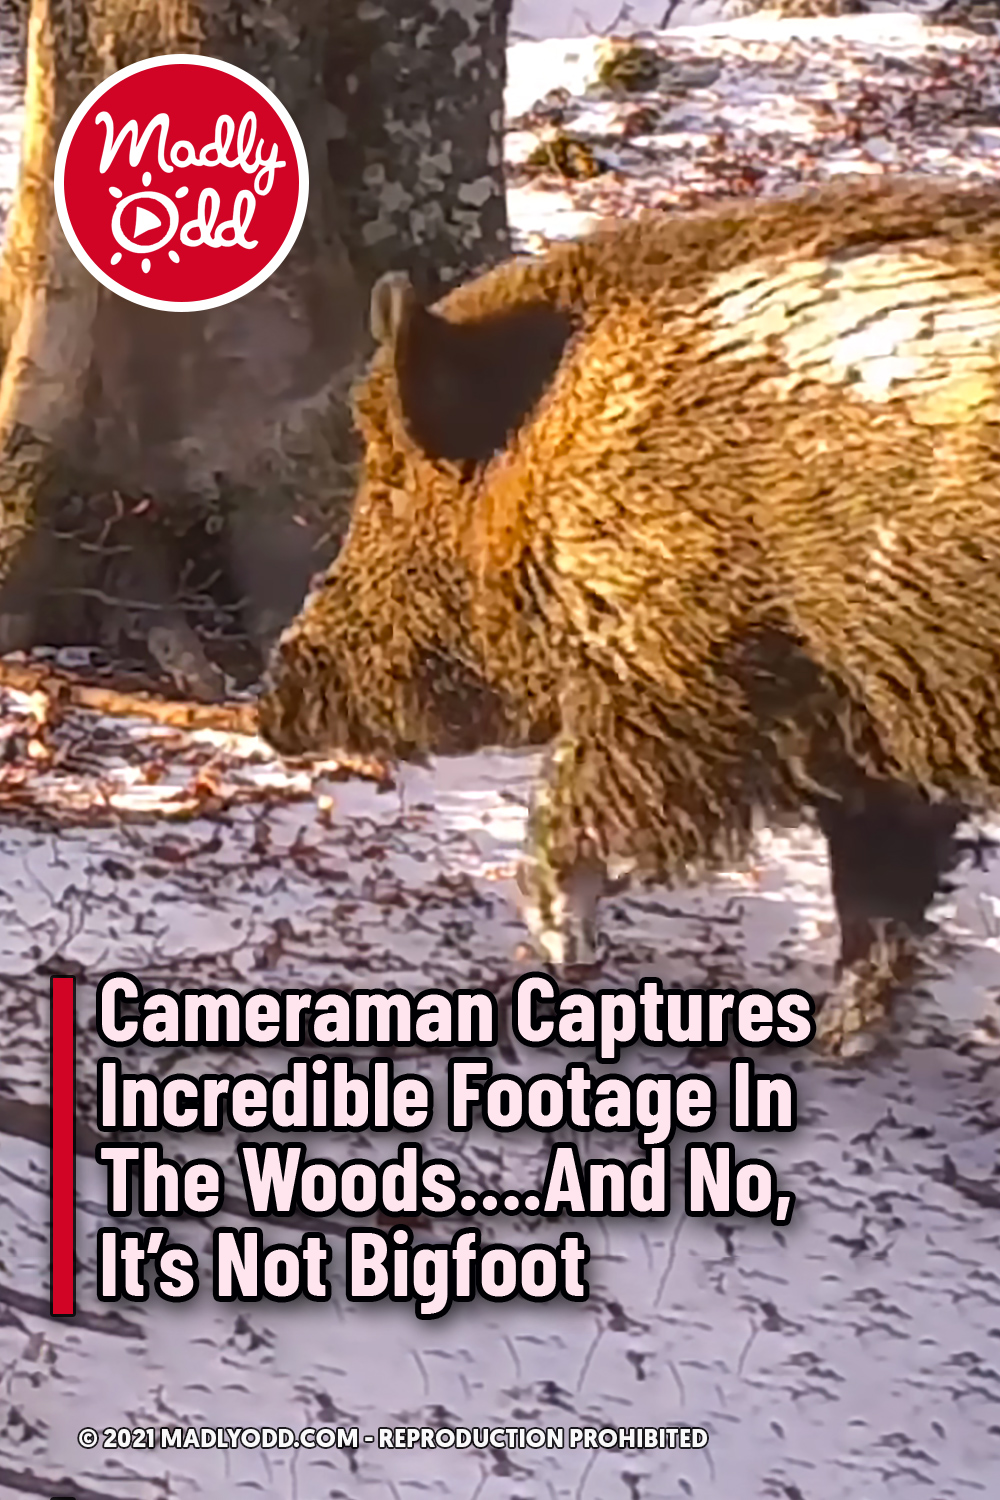 Cameraman Captures Incredible Footage In The Woods….And No, It’s Not Bigfoot